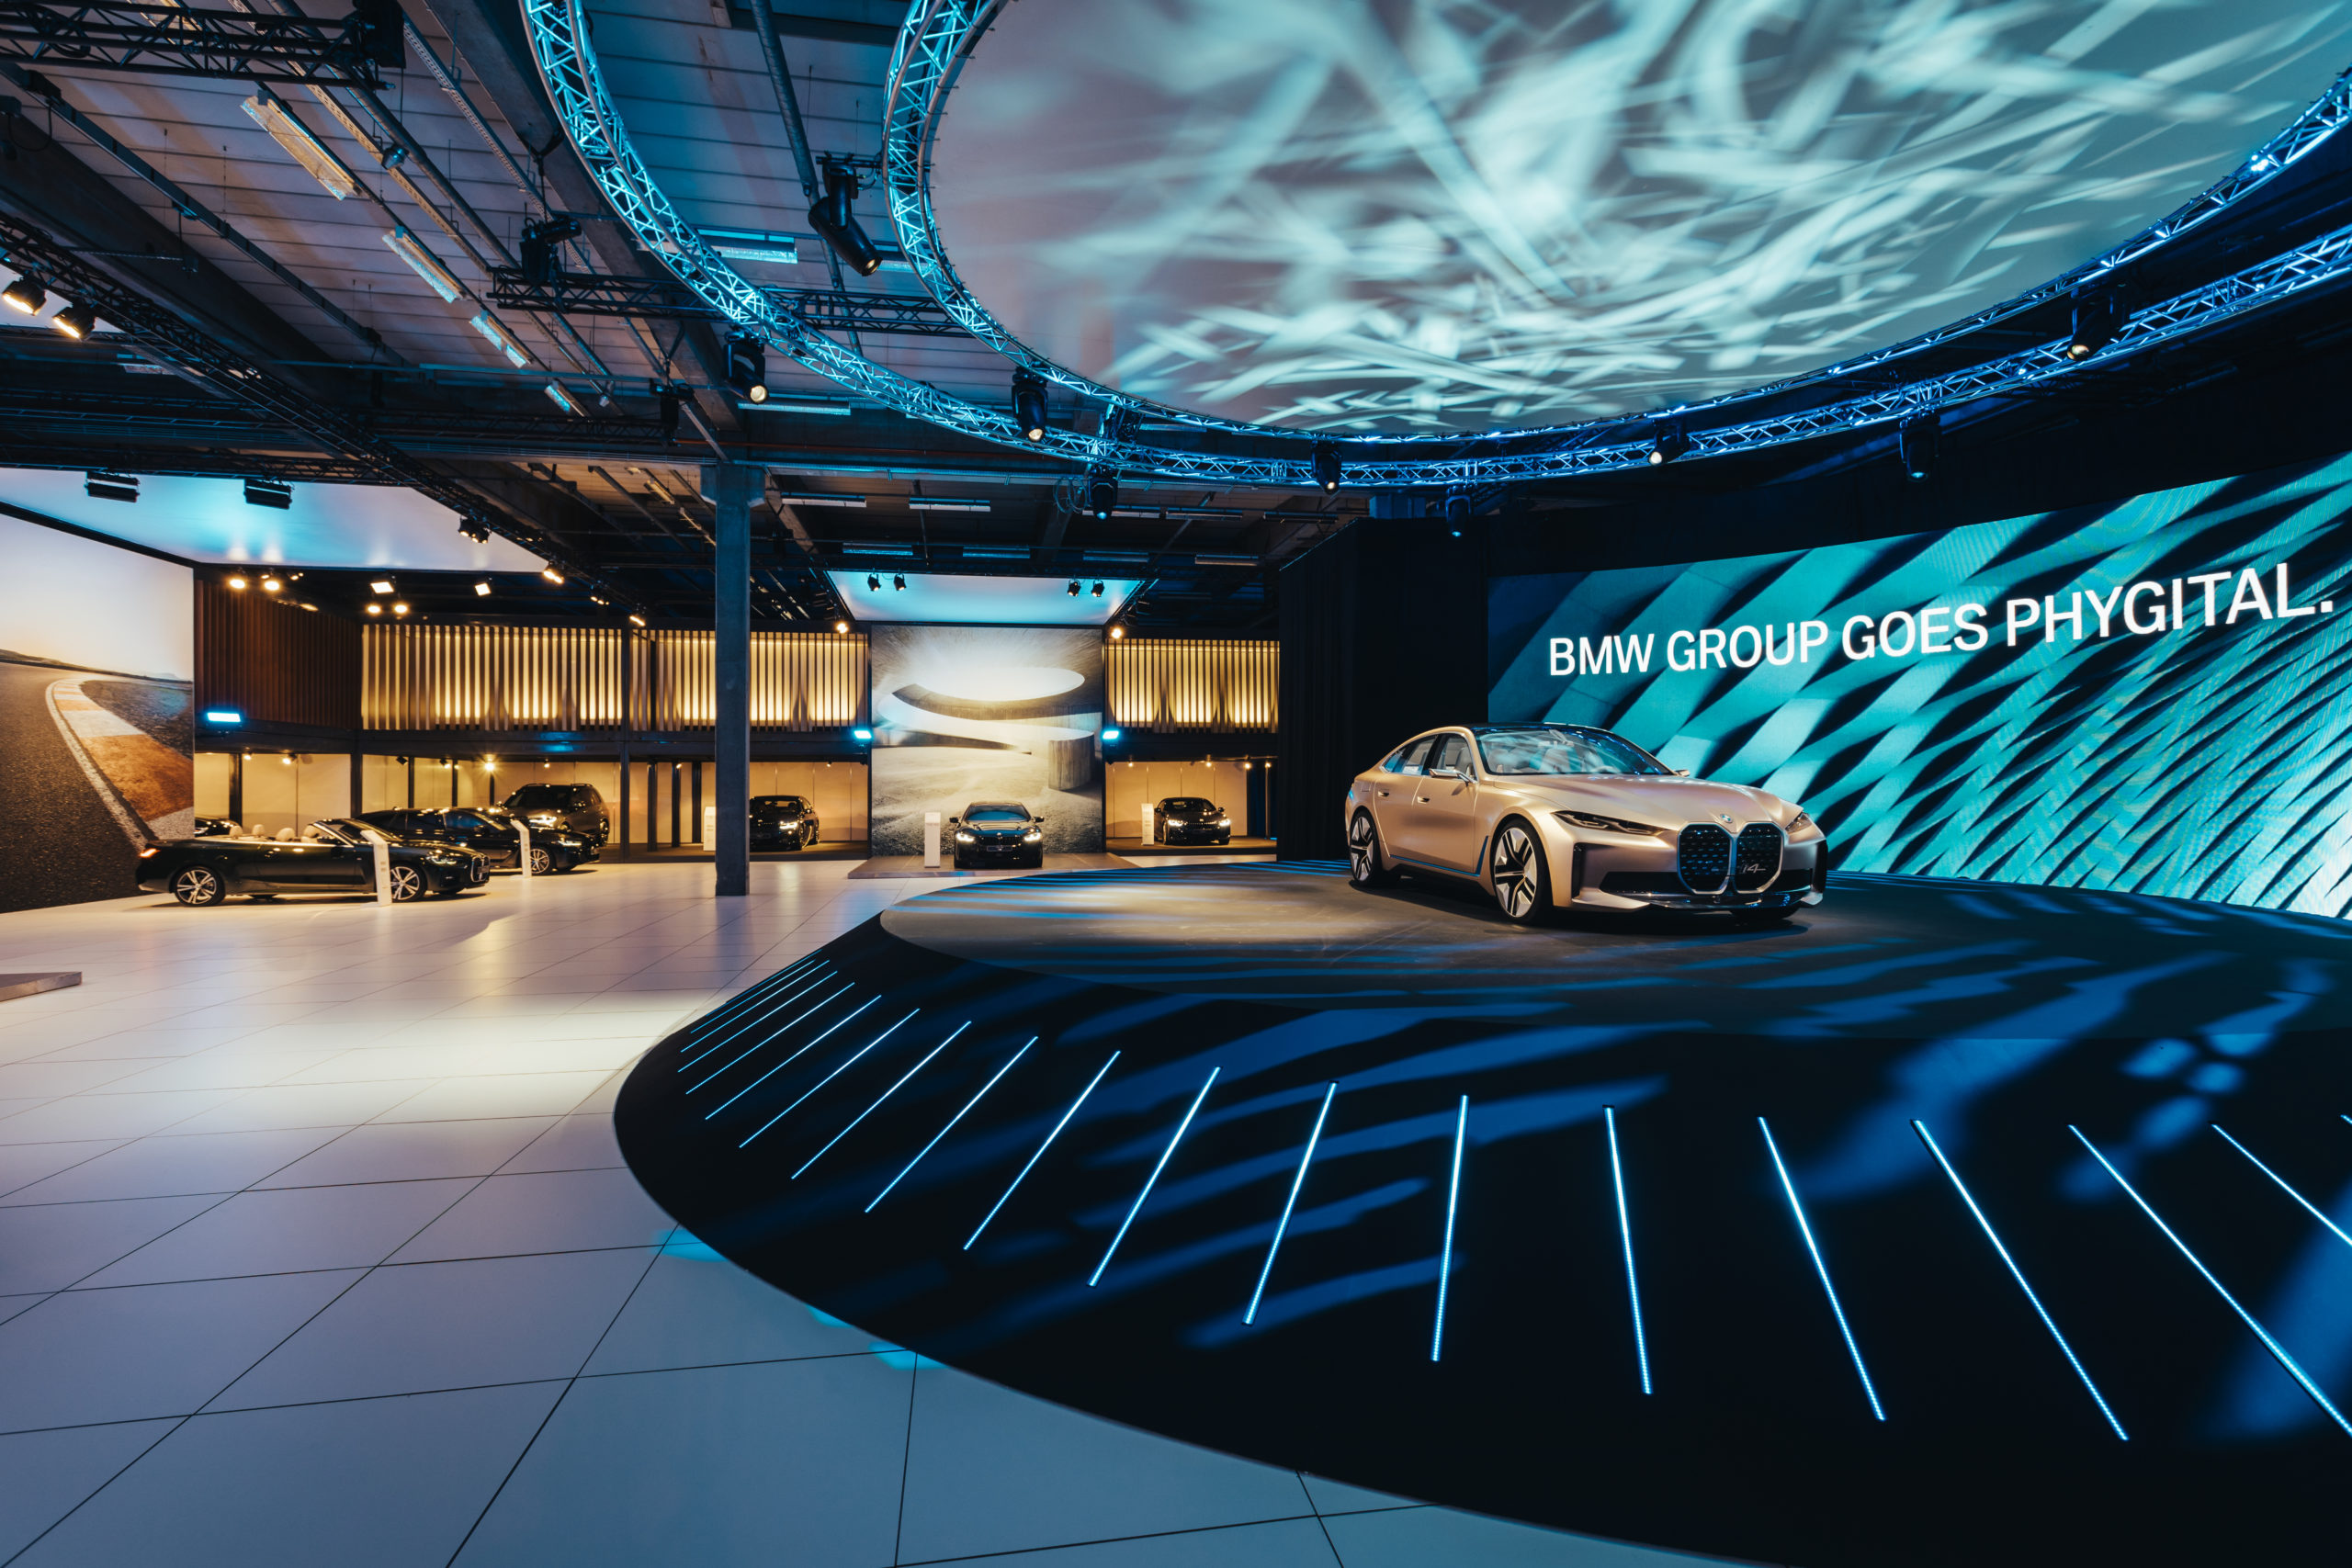 BMW Group Belux organizes its own motor show in home turf